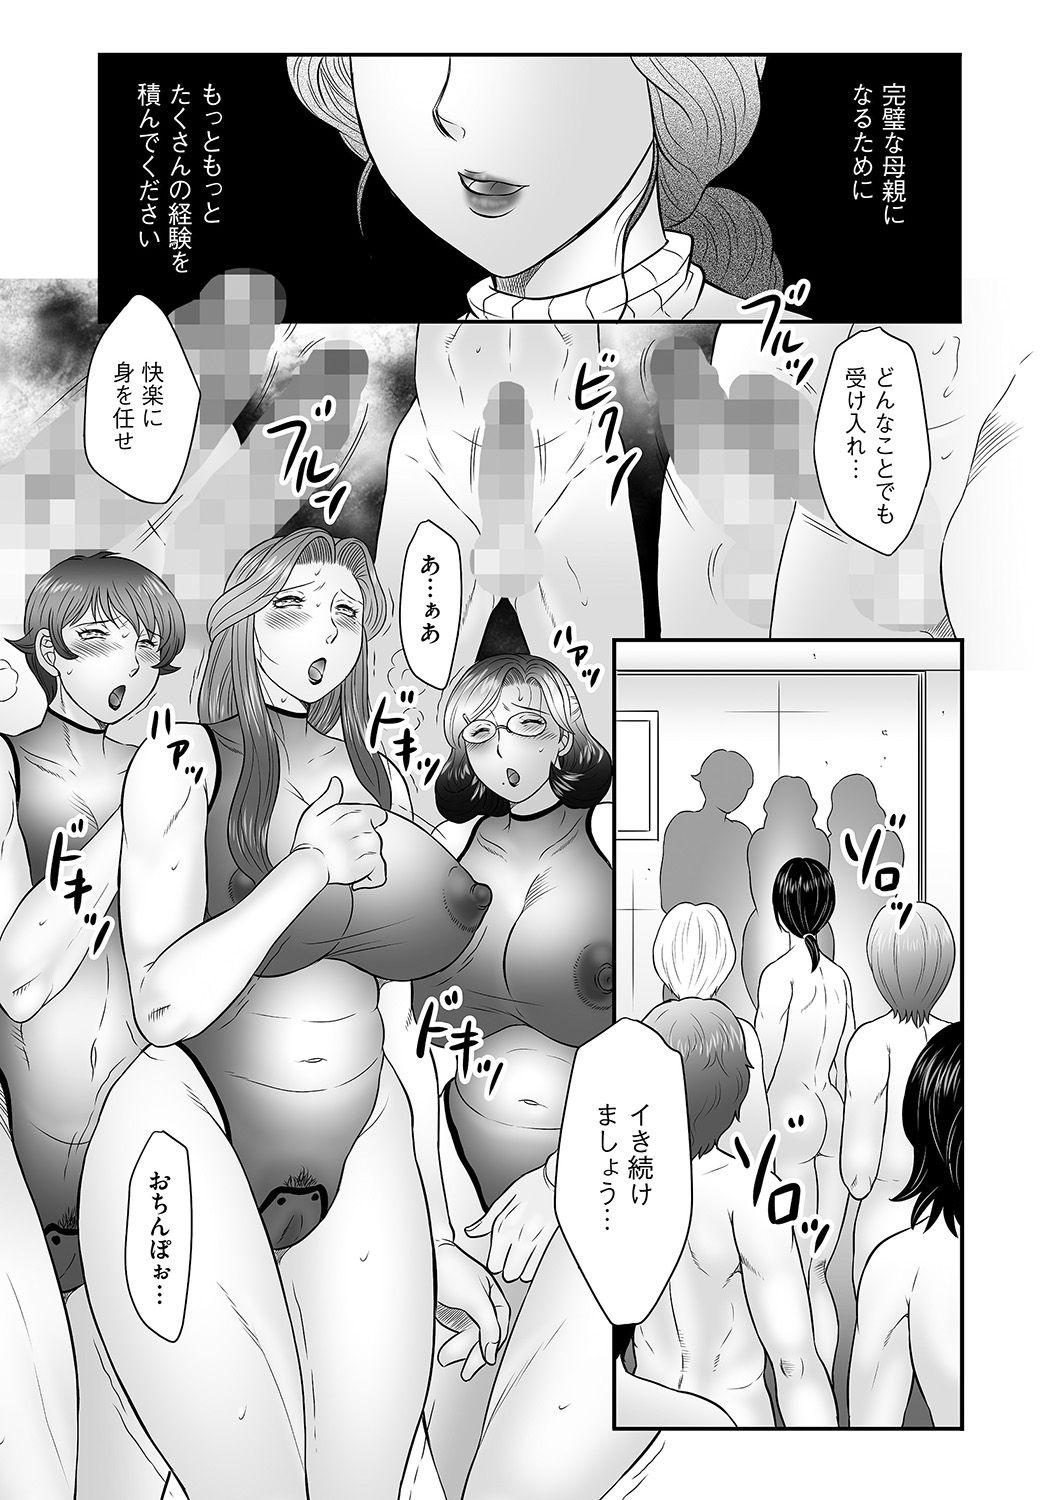 Boshi no Susume - The advice of the mother and child Ch. 13 6